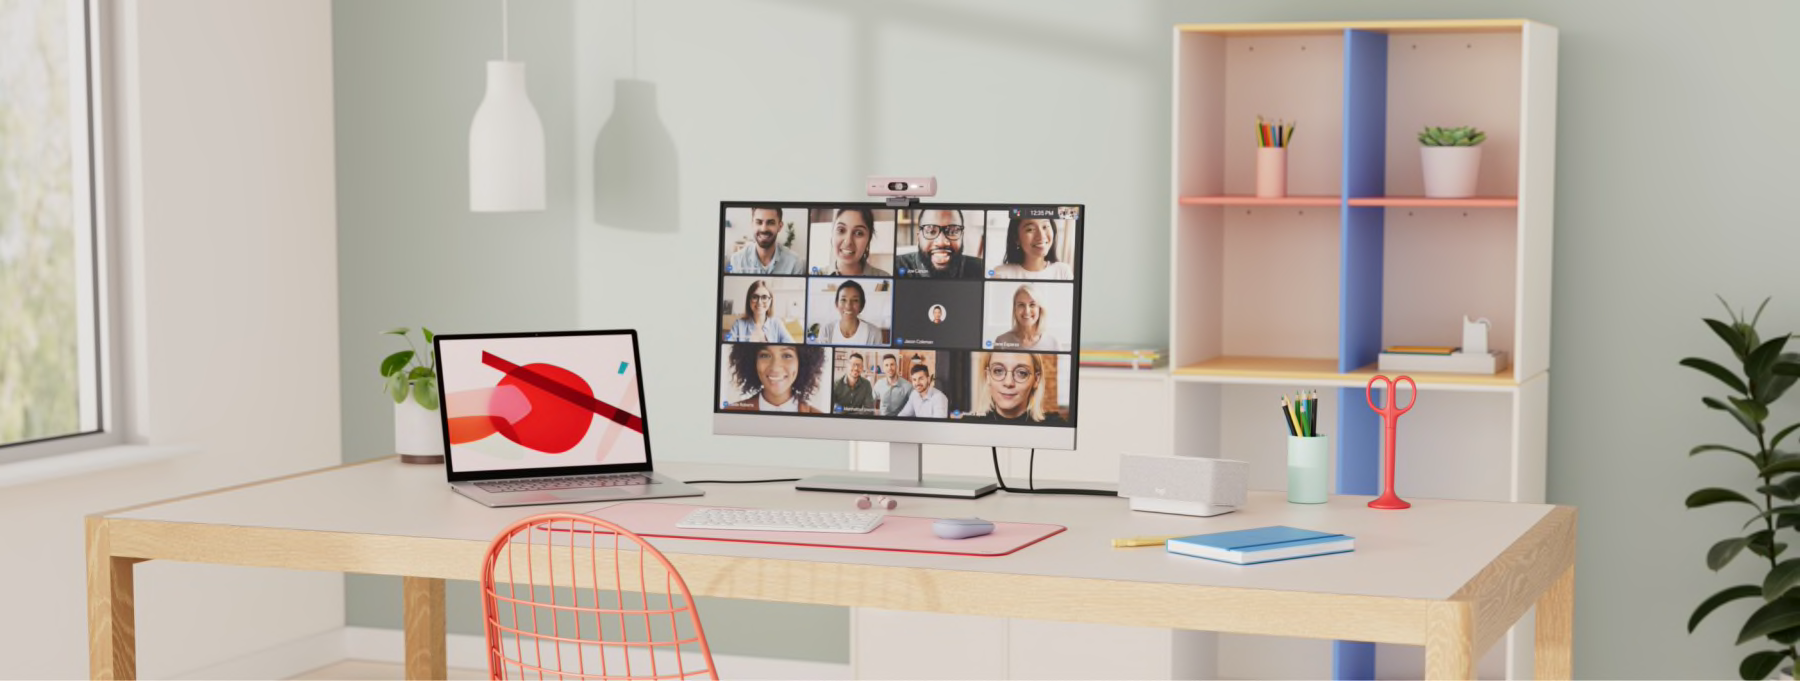 Google meet Solutions for home office